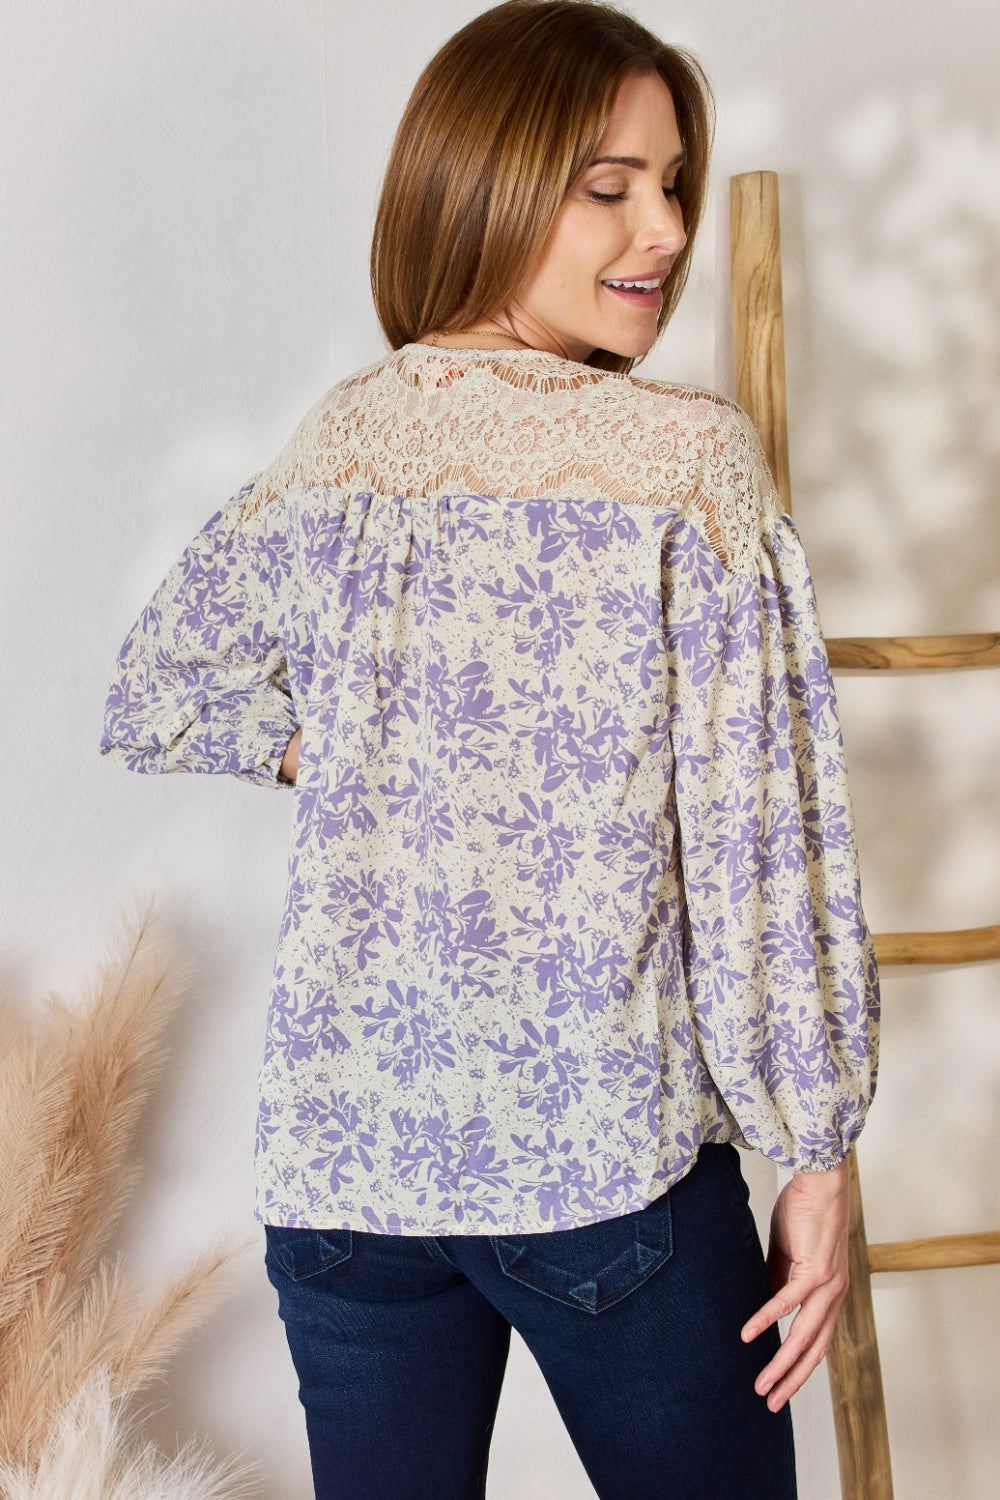 Lace Floral Top - Lavender - Inspired Eye Boutique